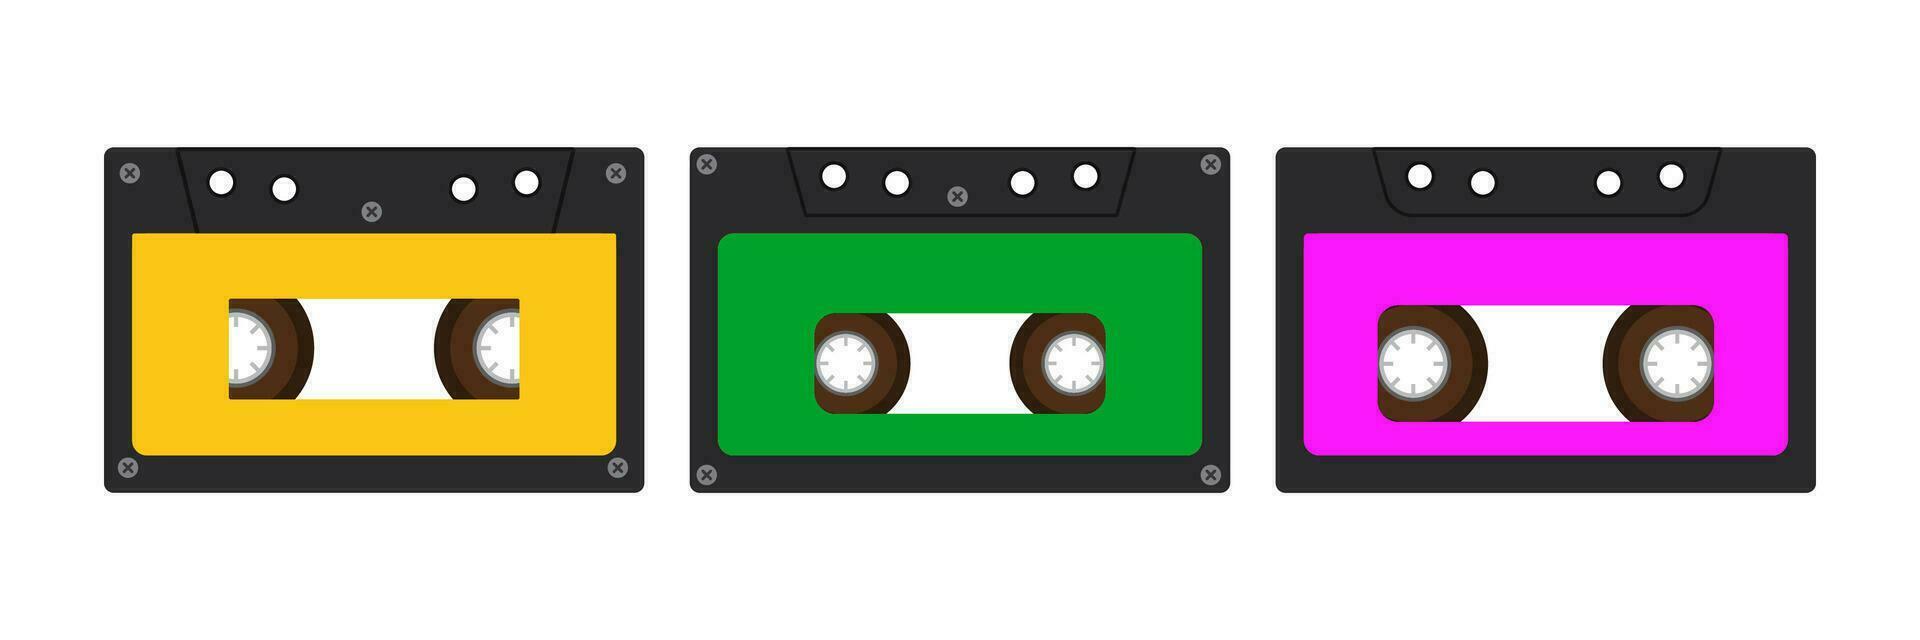 Old-fashioned audio cassettes from the 90s. Bright multi-colored clipart. Ready-made vector illustrations isolated on a white background.